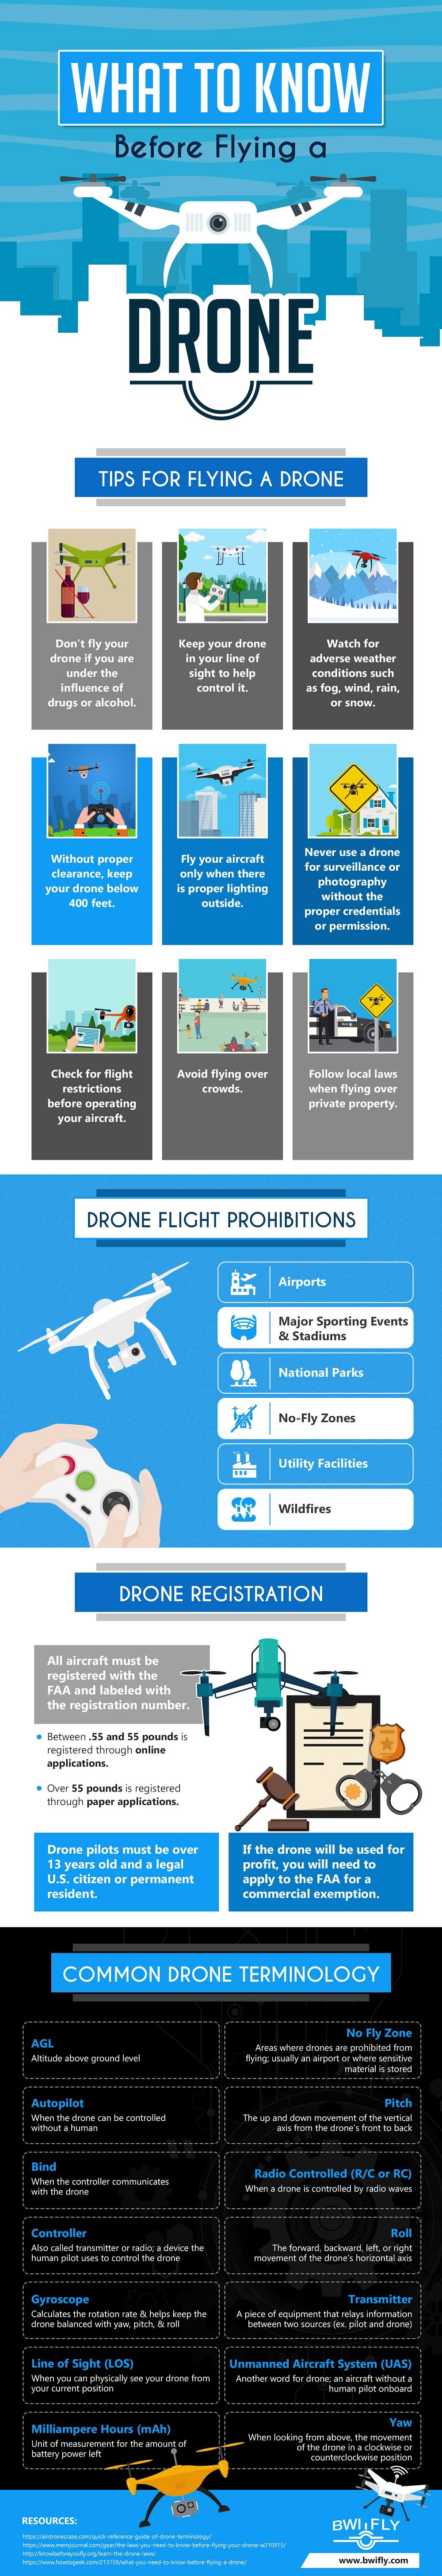 What to Know Before Flying a Drone #infographic